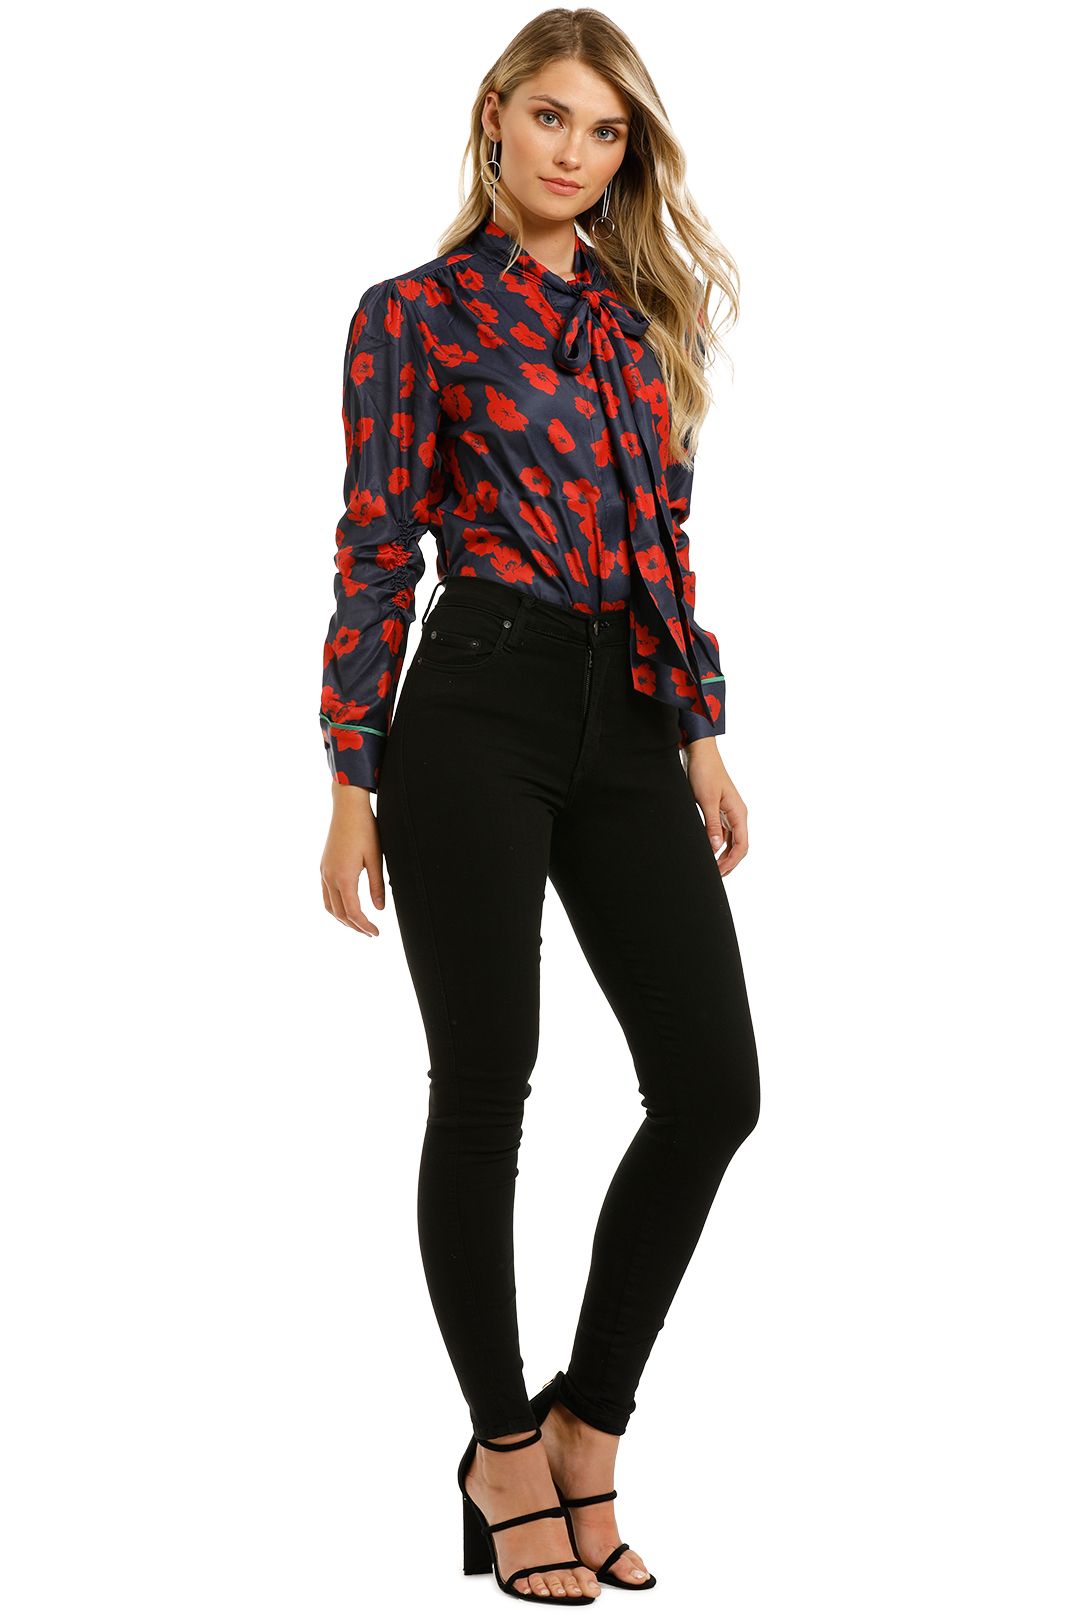 Grace-Willow-River-Blouse-Red-Poppy-Print-Side